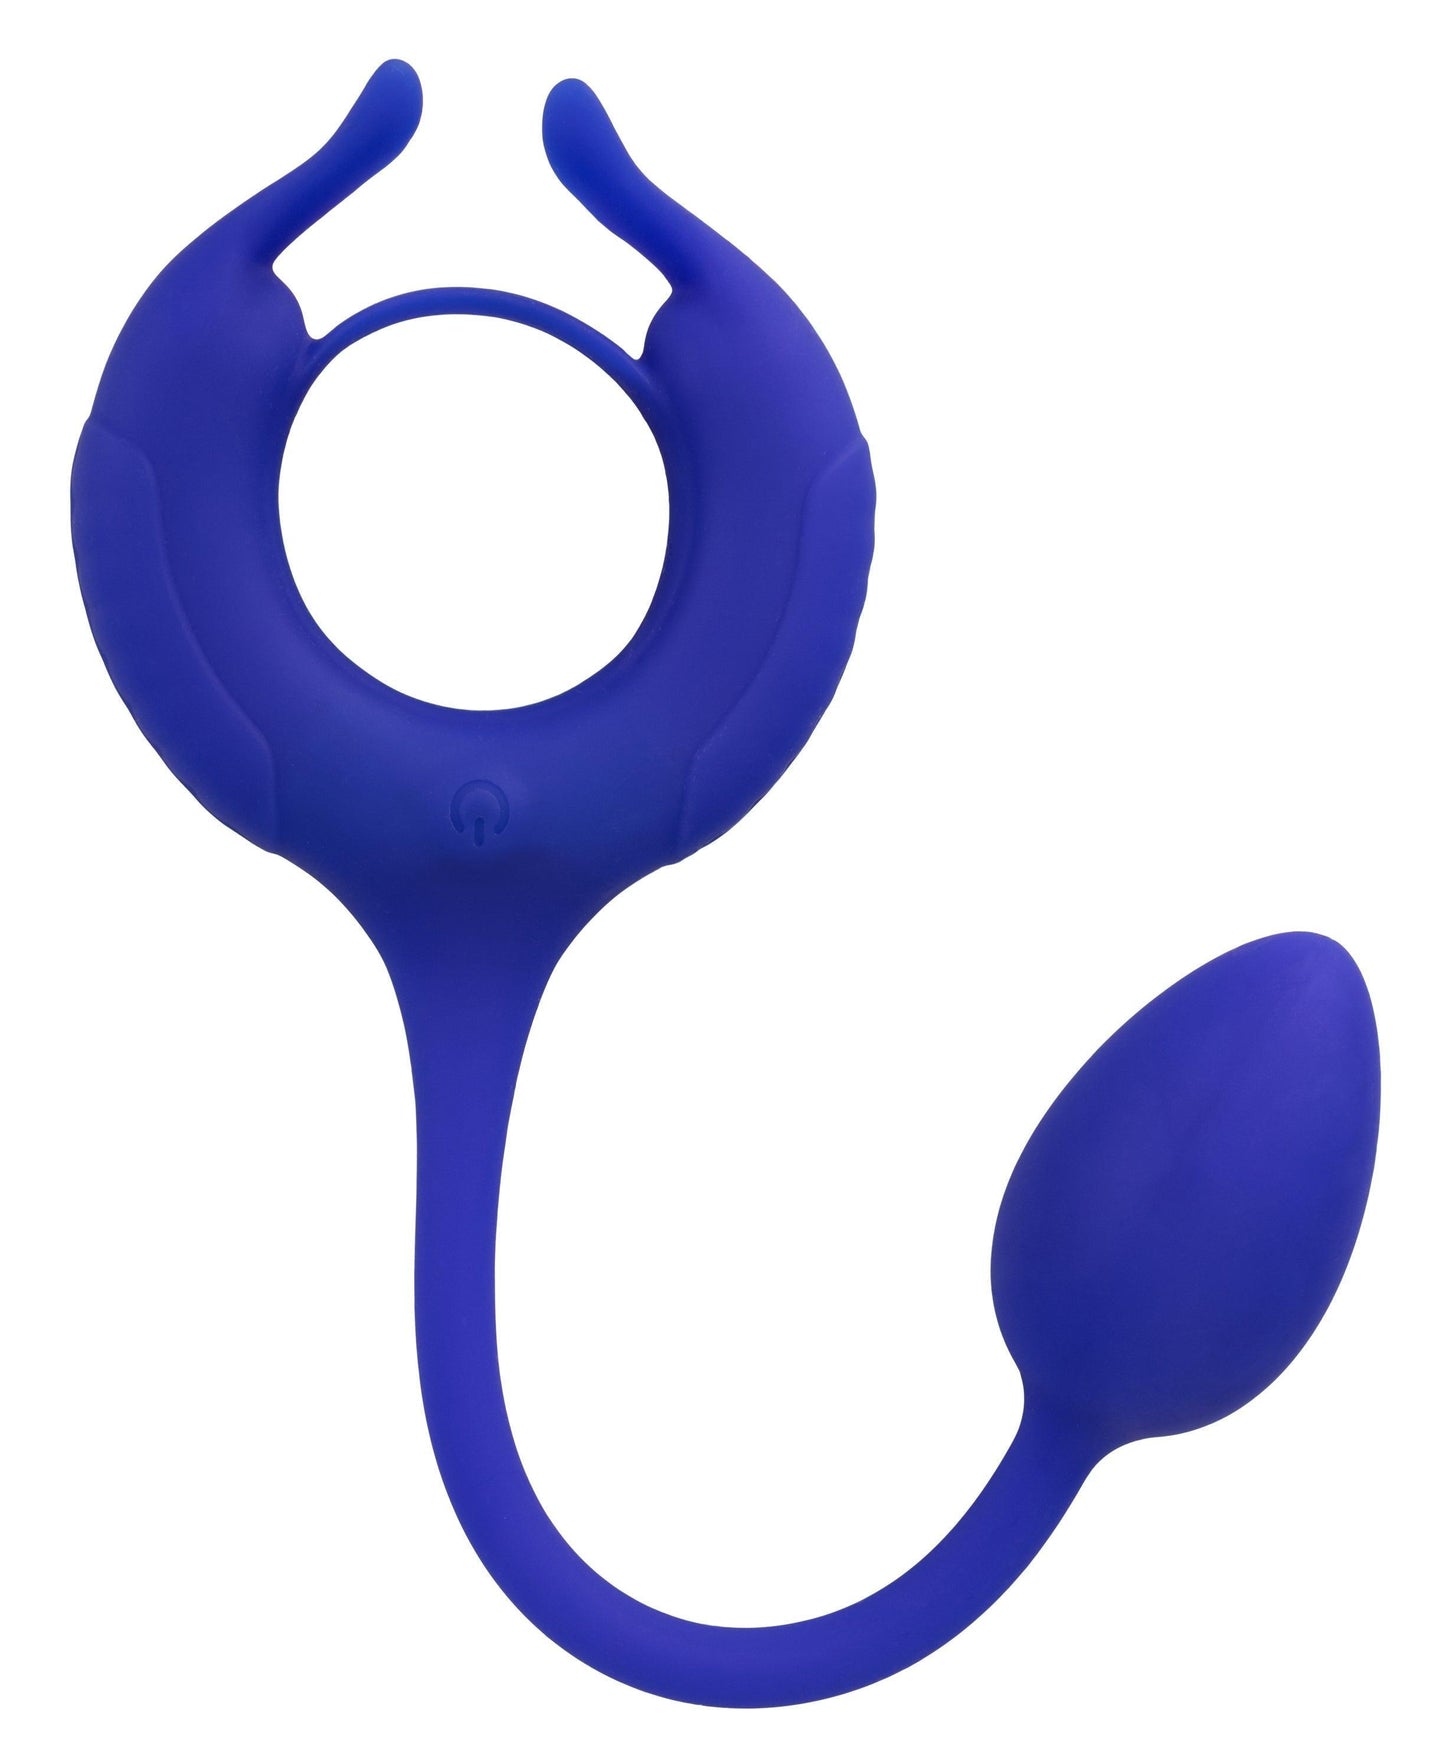 Admiral Plug and Play Weighted Cock Ring - Blue - My Sex Toy Hub